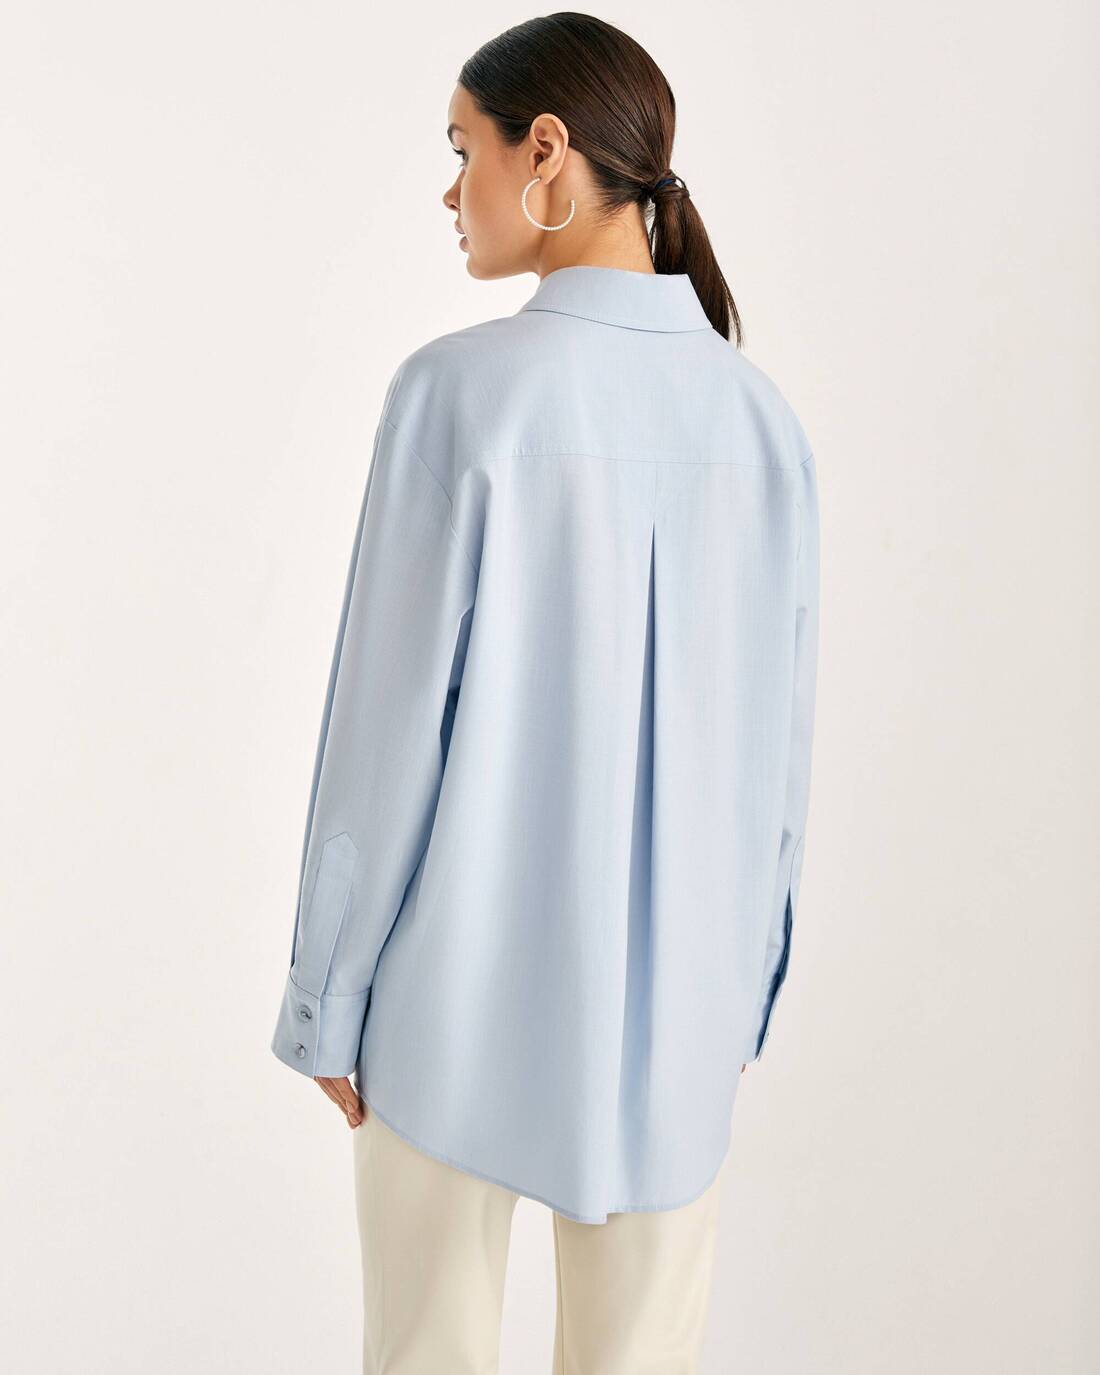 Oversized shirt with chest pockets